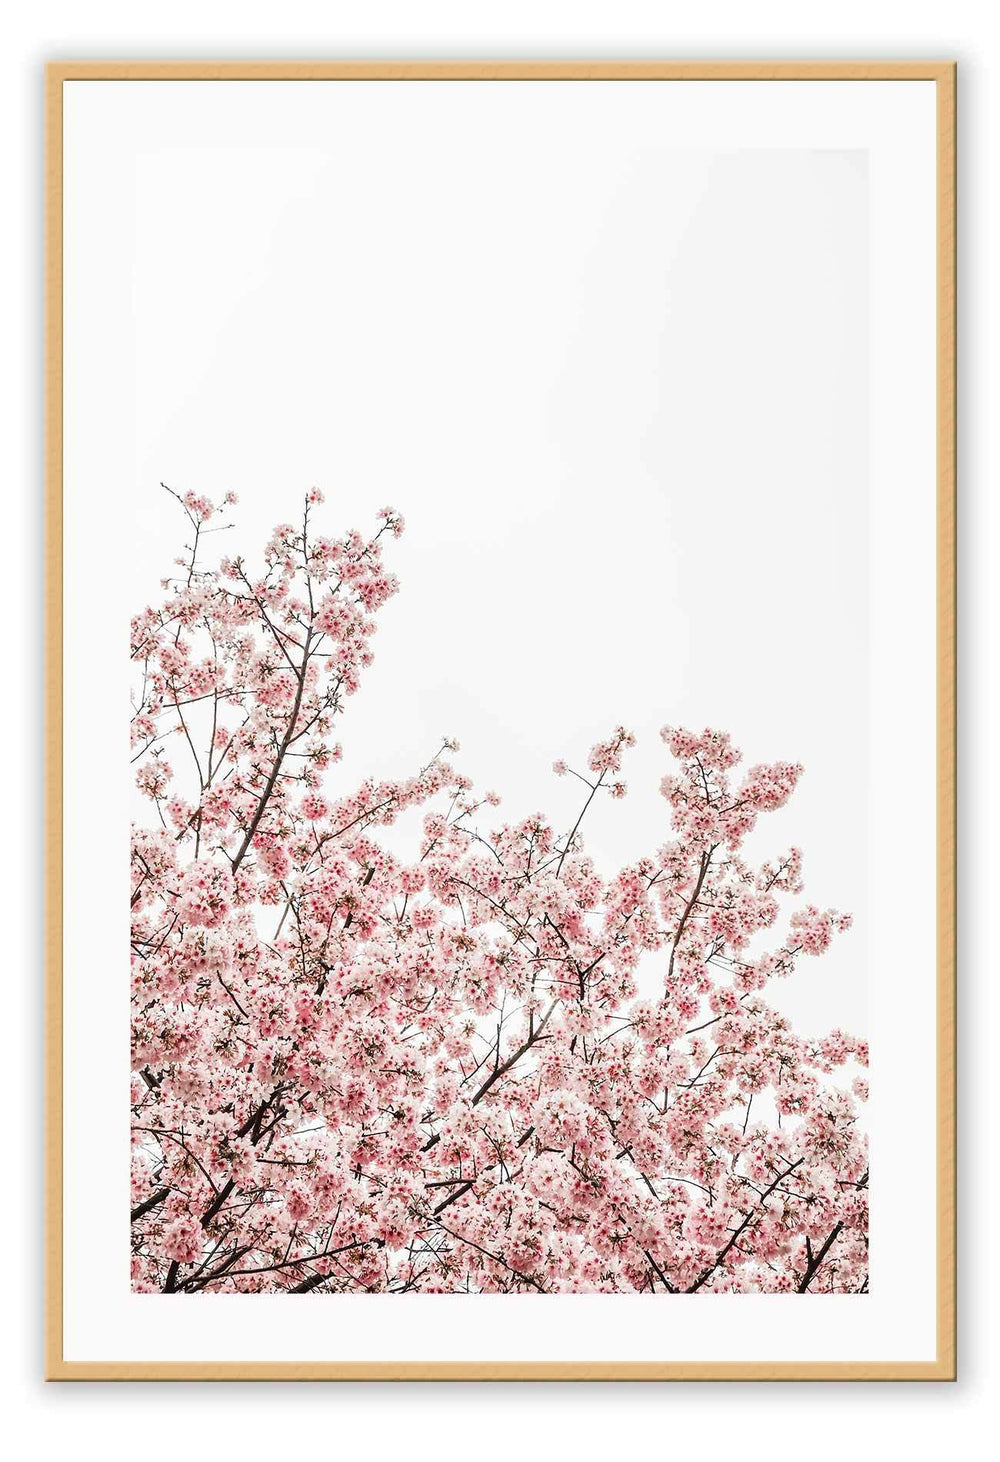 Canvas Prints Central Park Central Park Wall Art : Ready to hang framed artwork. Brand